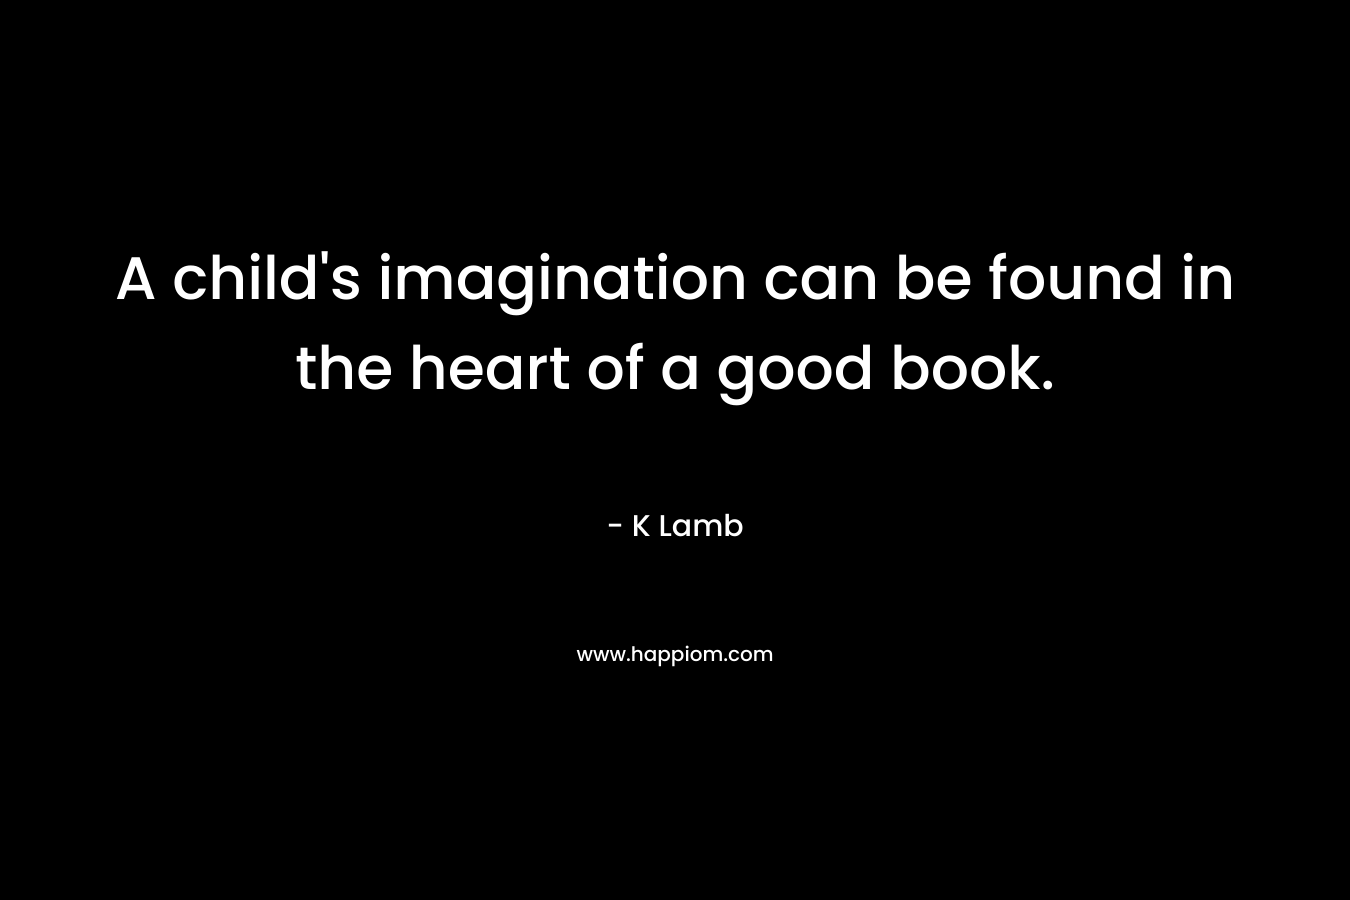 A child's imagination can be found in the heart of a good book.